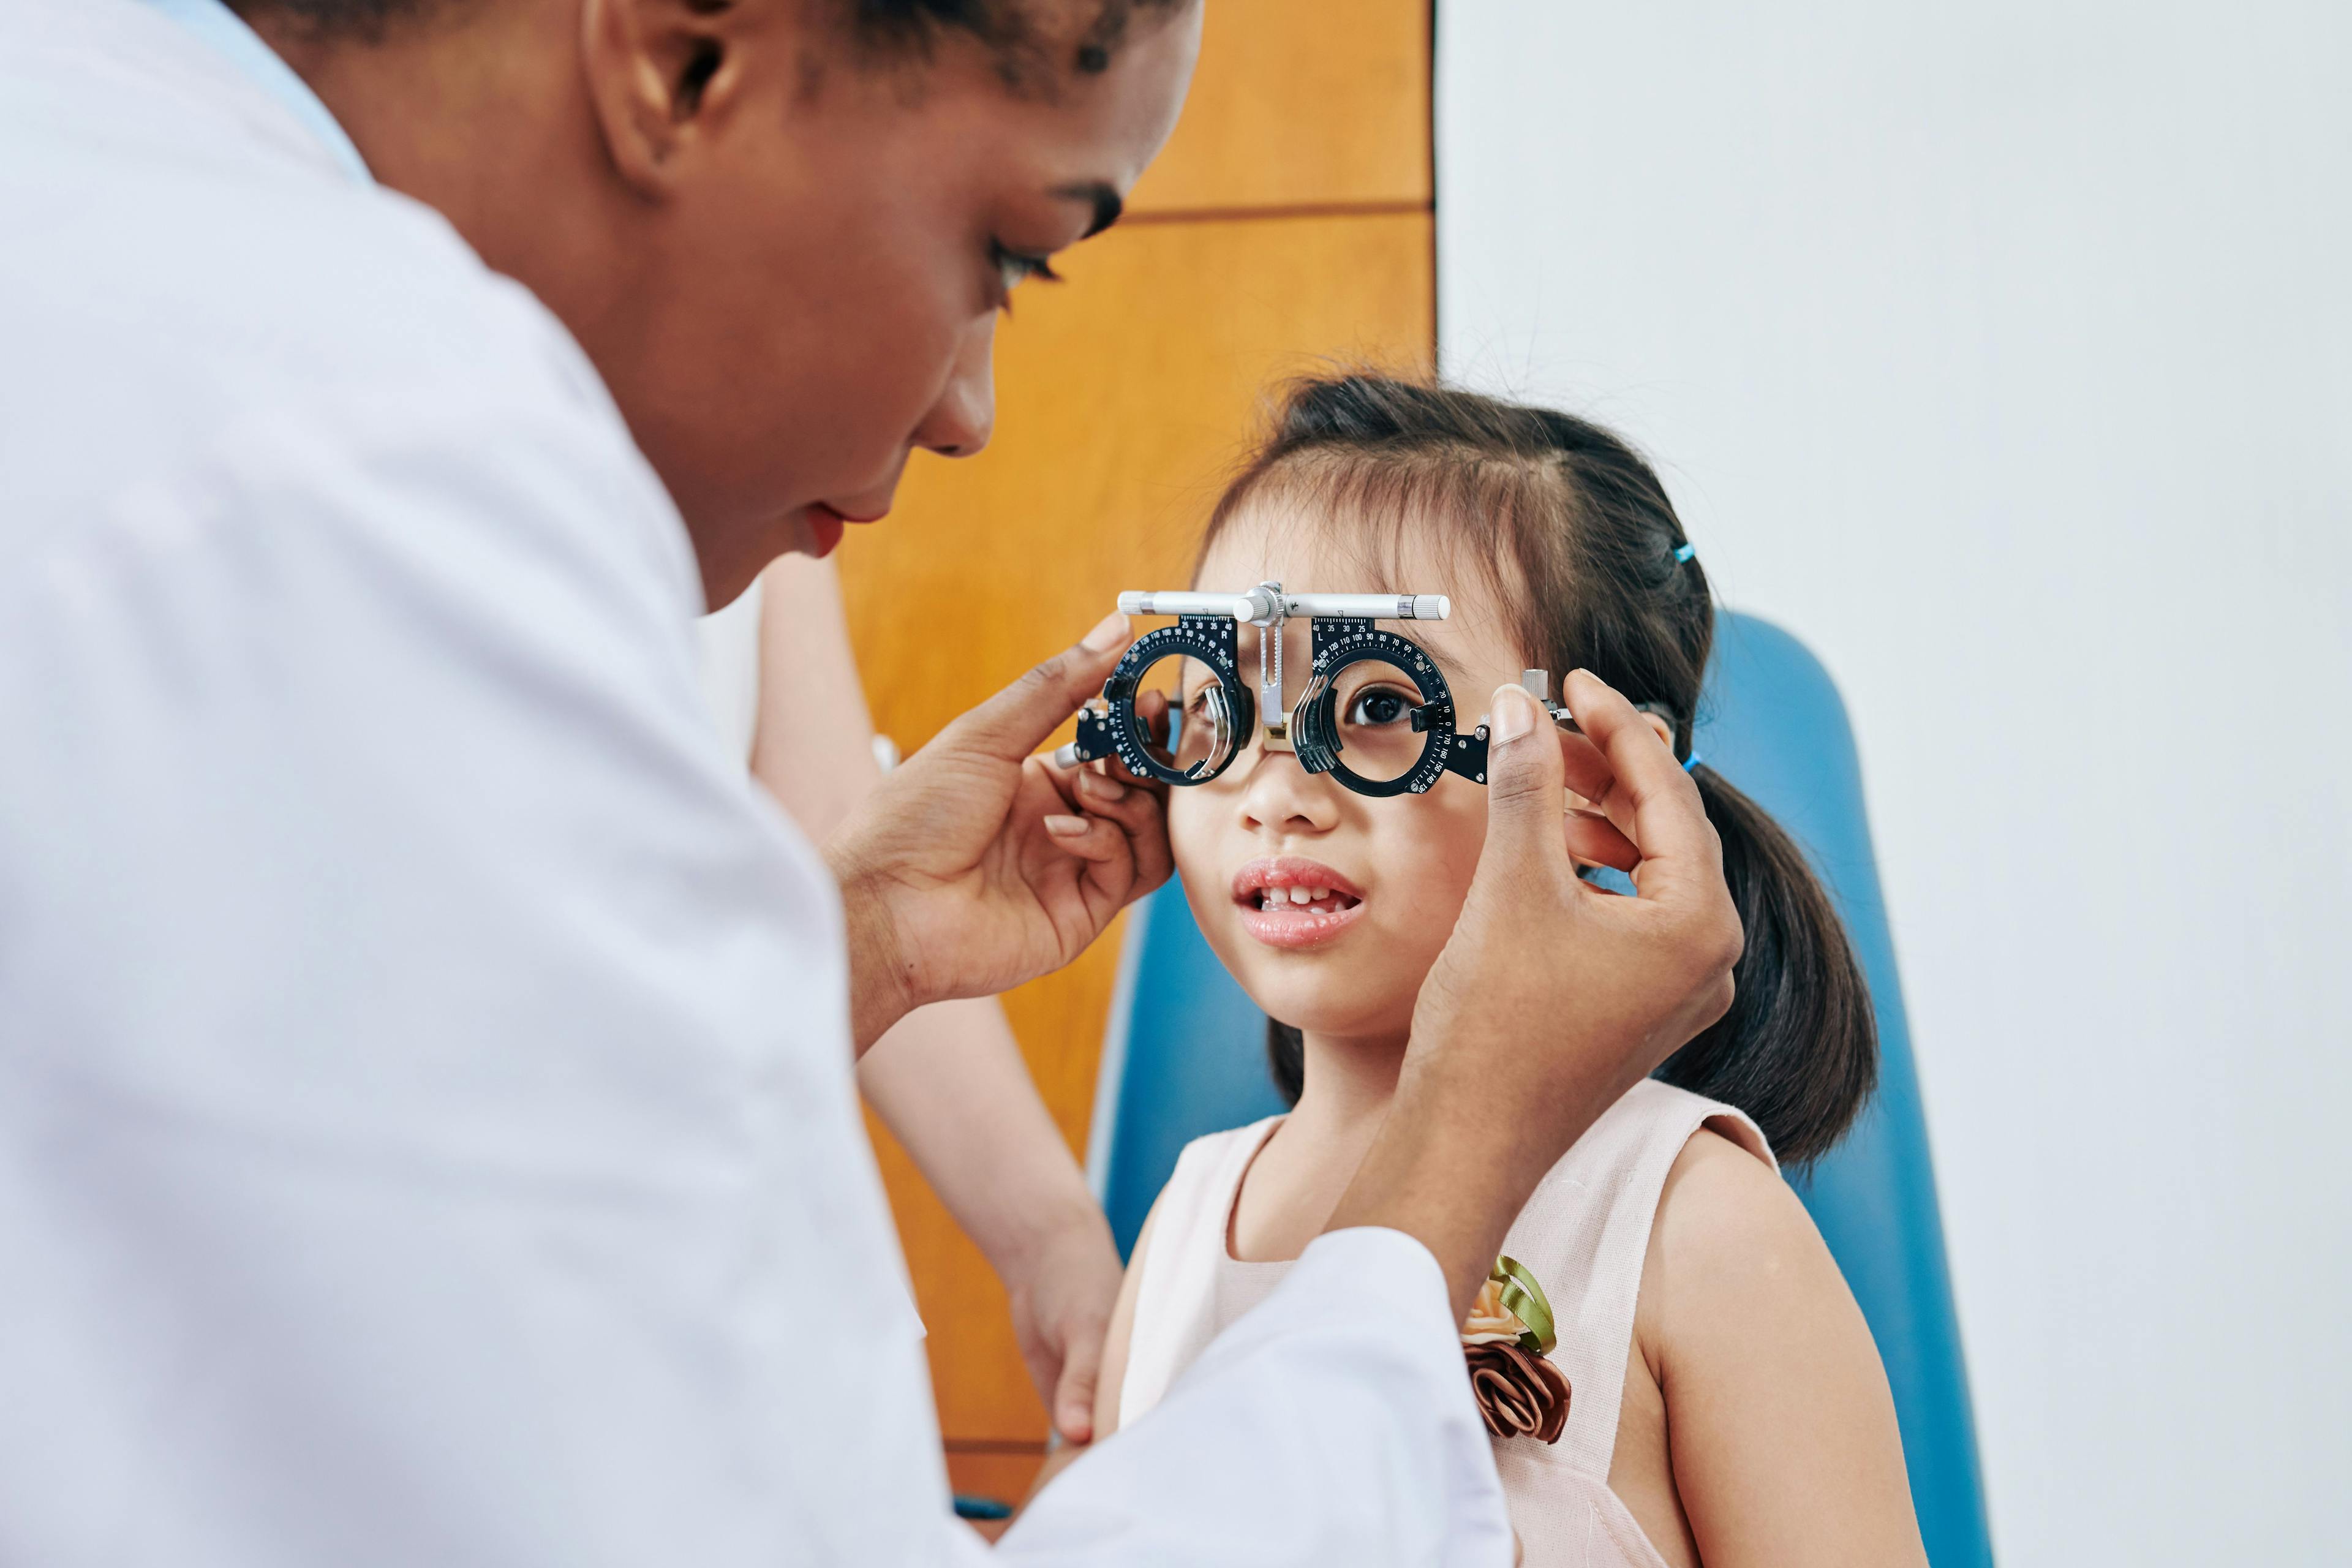 Ophthalmologic Considerations for Pediatric Dermatologists